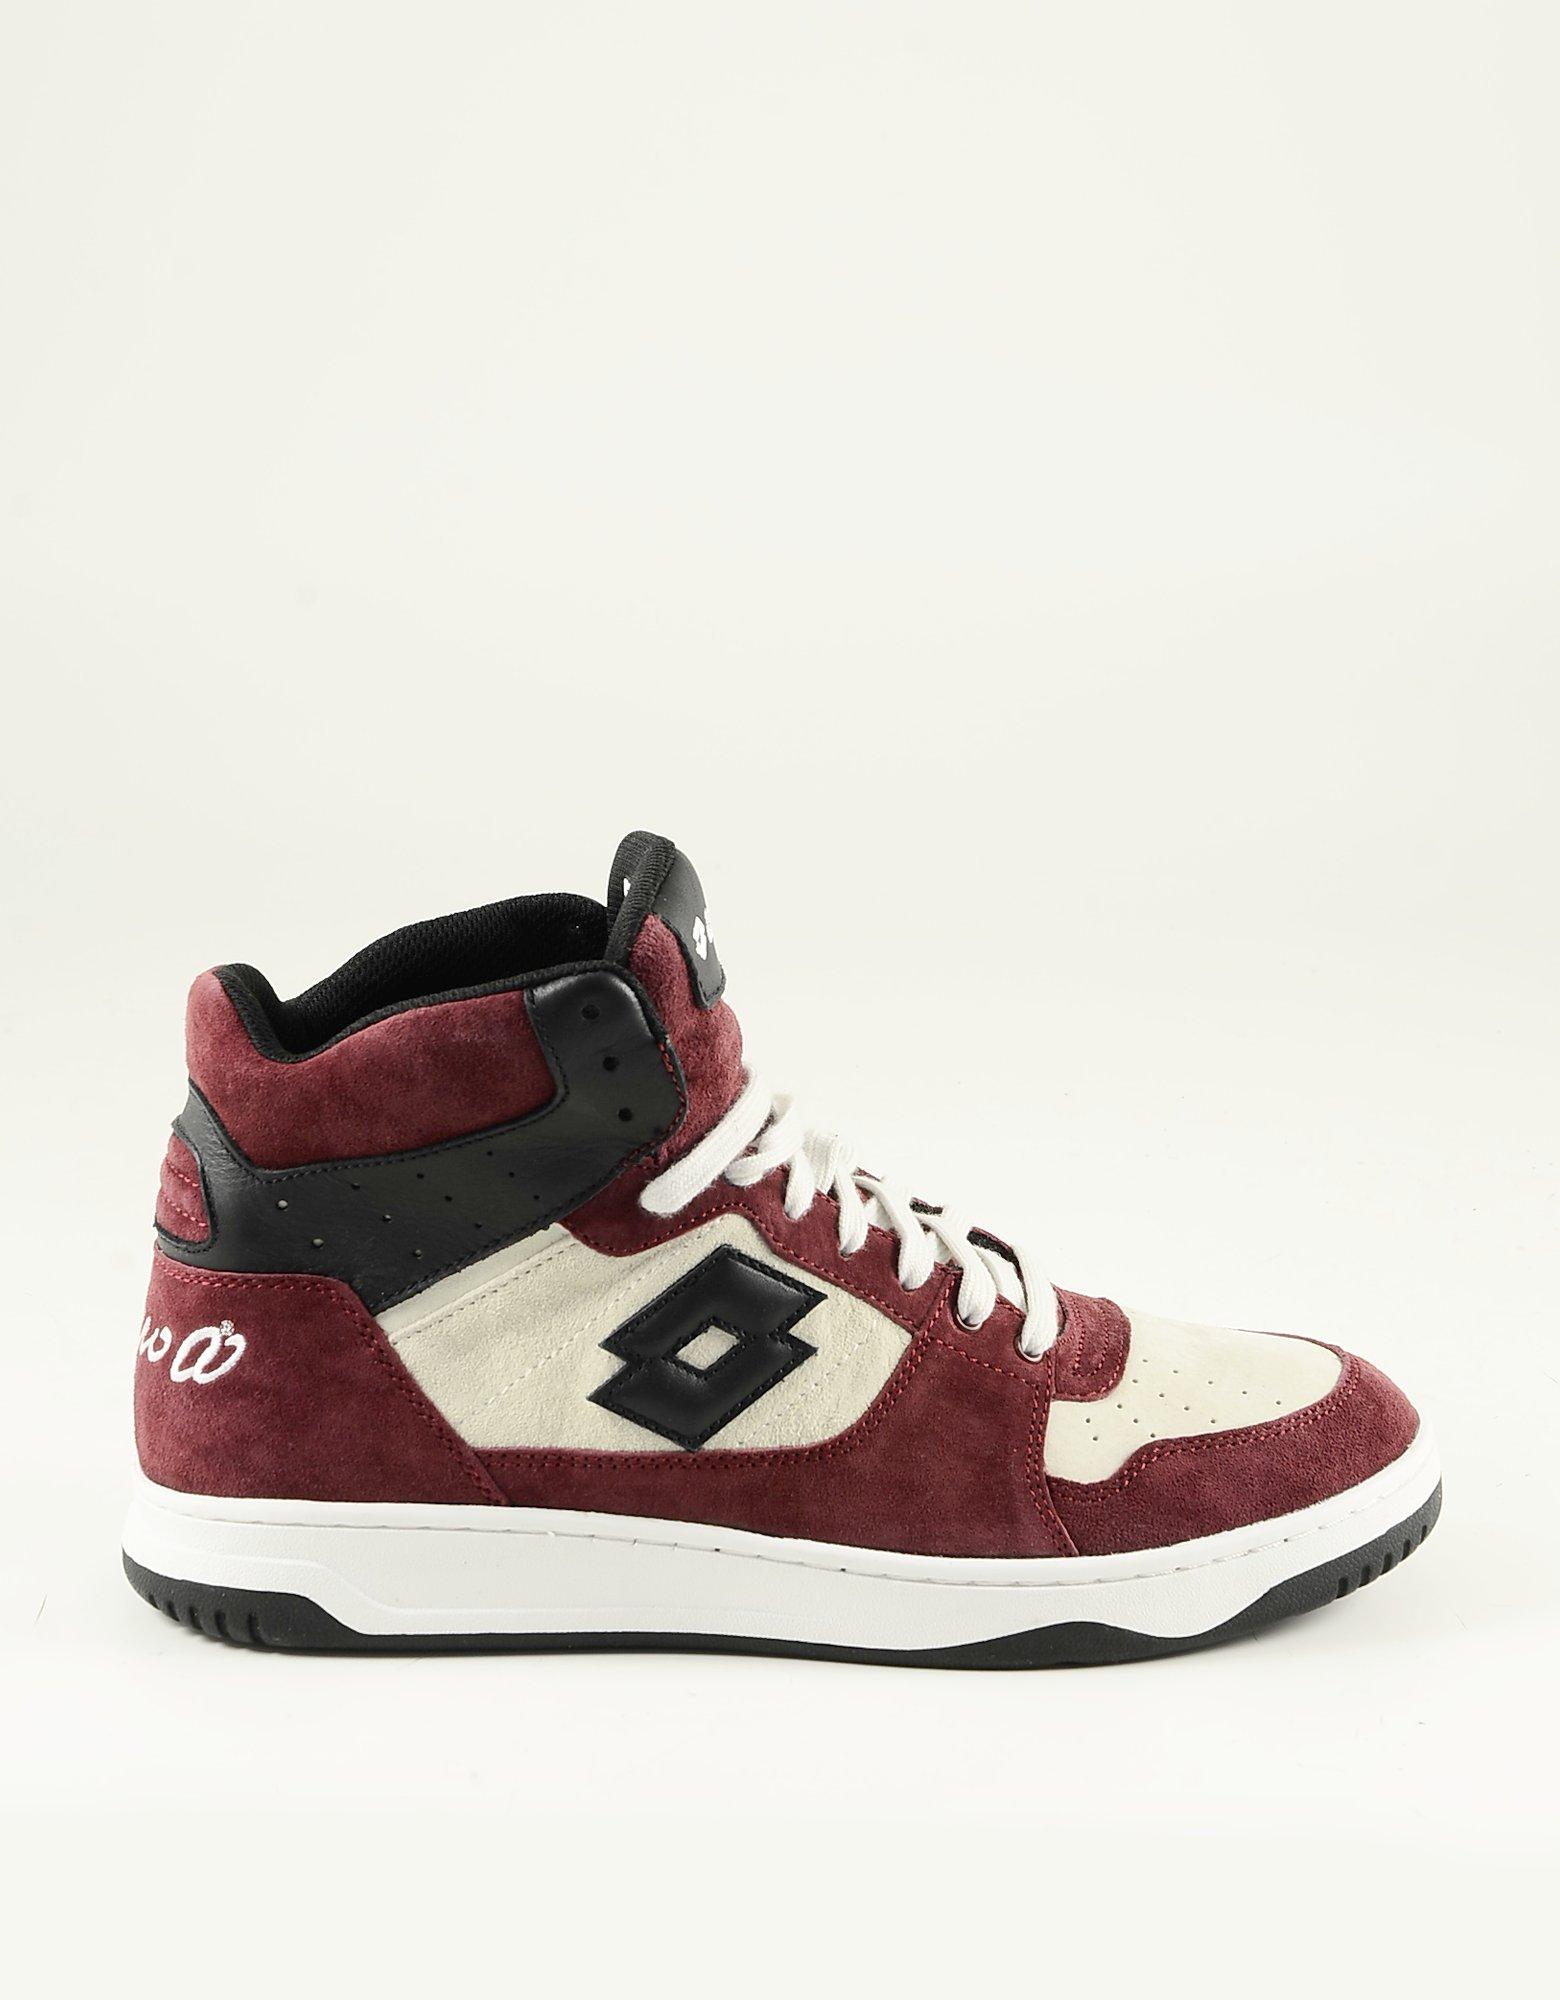 Schelden Kraan Kaal Lotto Numero 00 X Lotto Red and White High-top Men's Sneakers. 45 IT at  FORZIERI